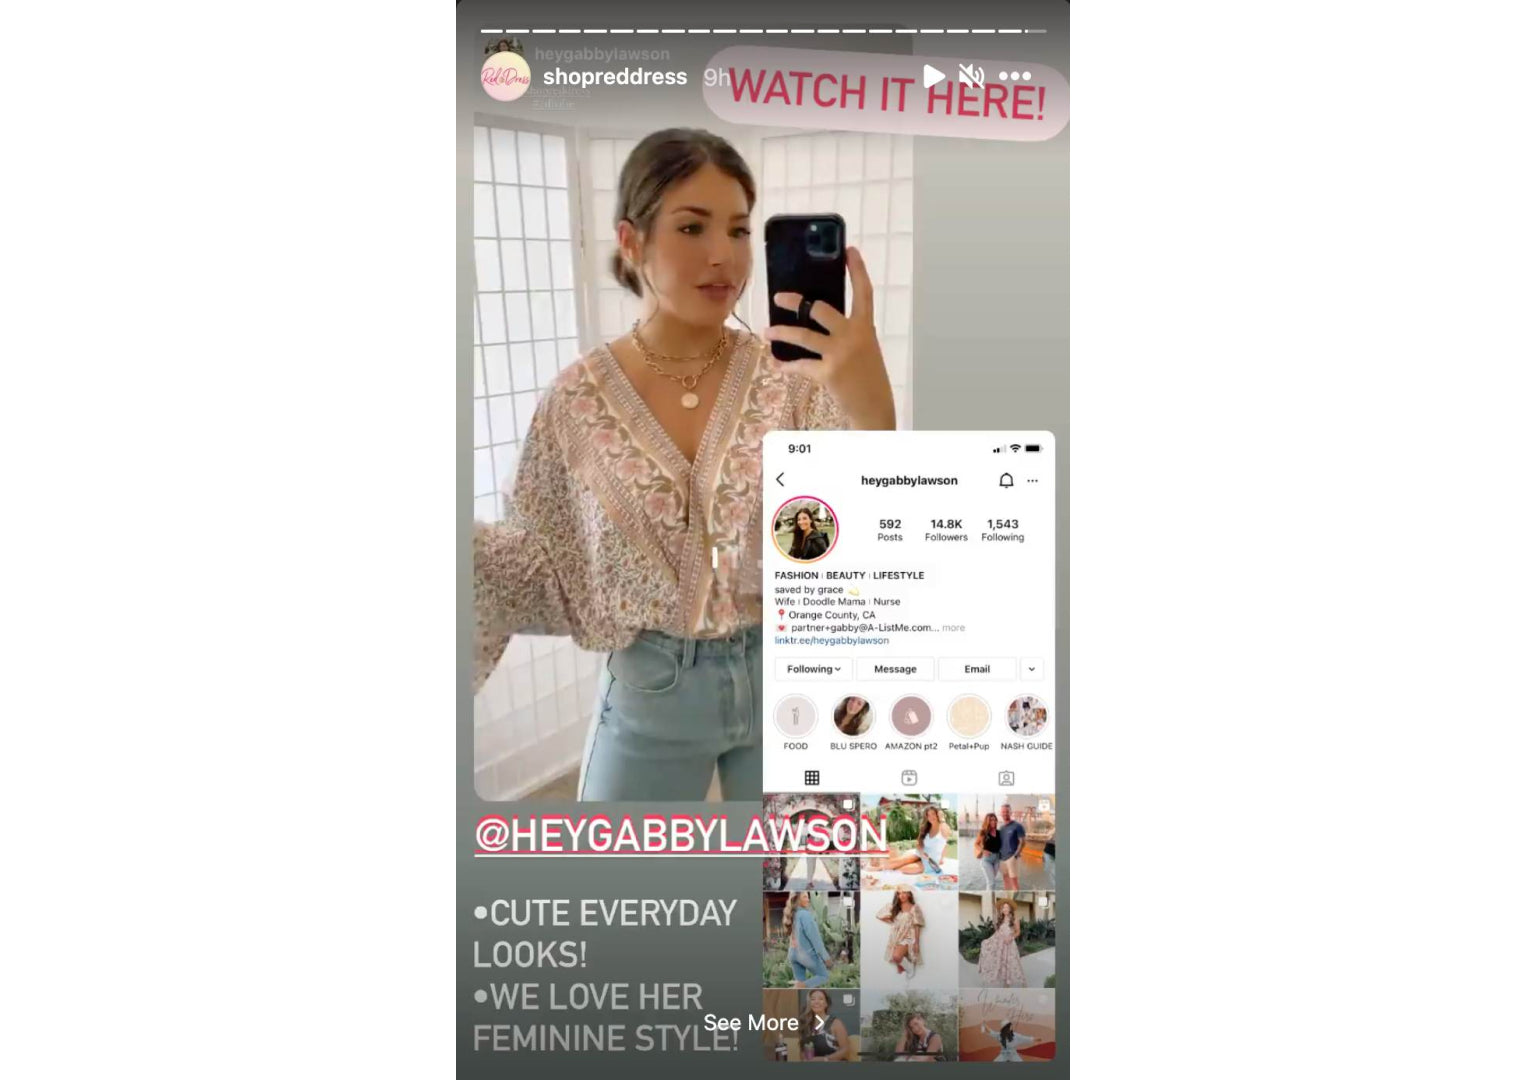 red dress using micro influencers for social commerce in bfcm